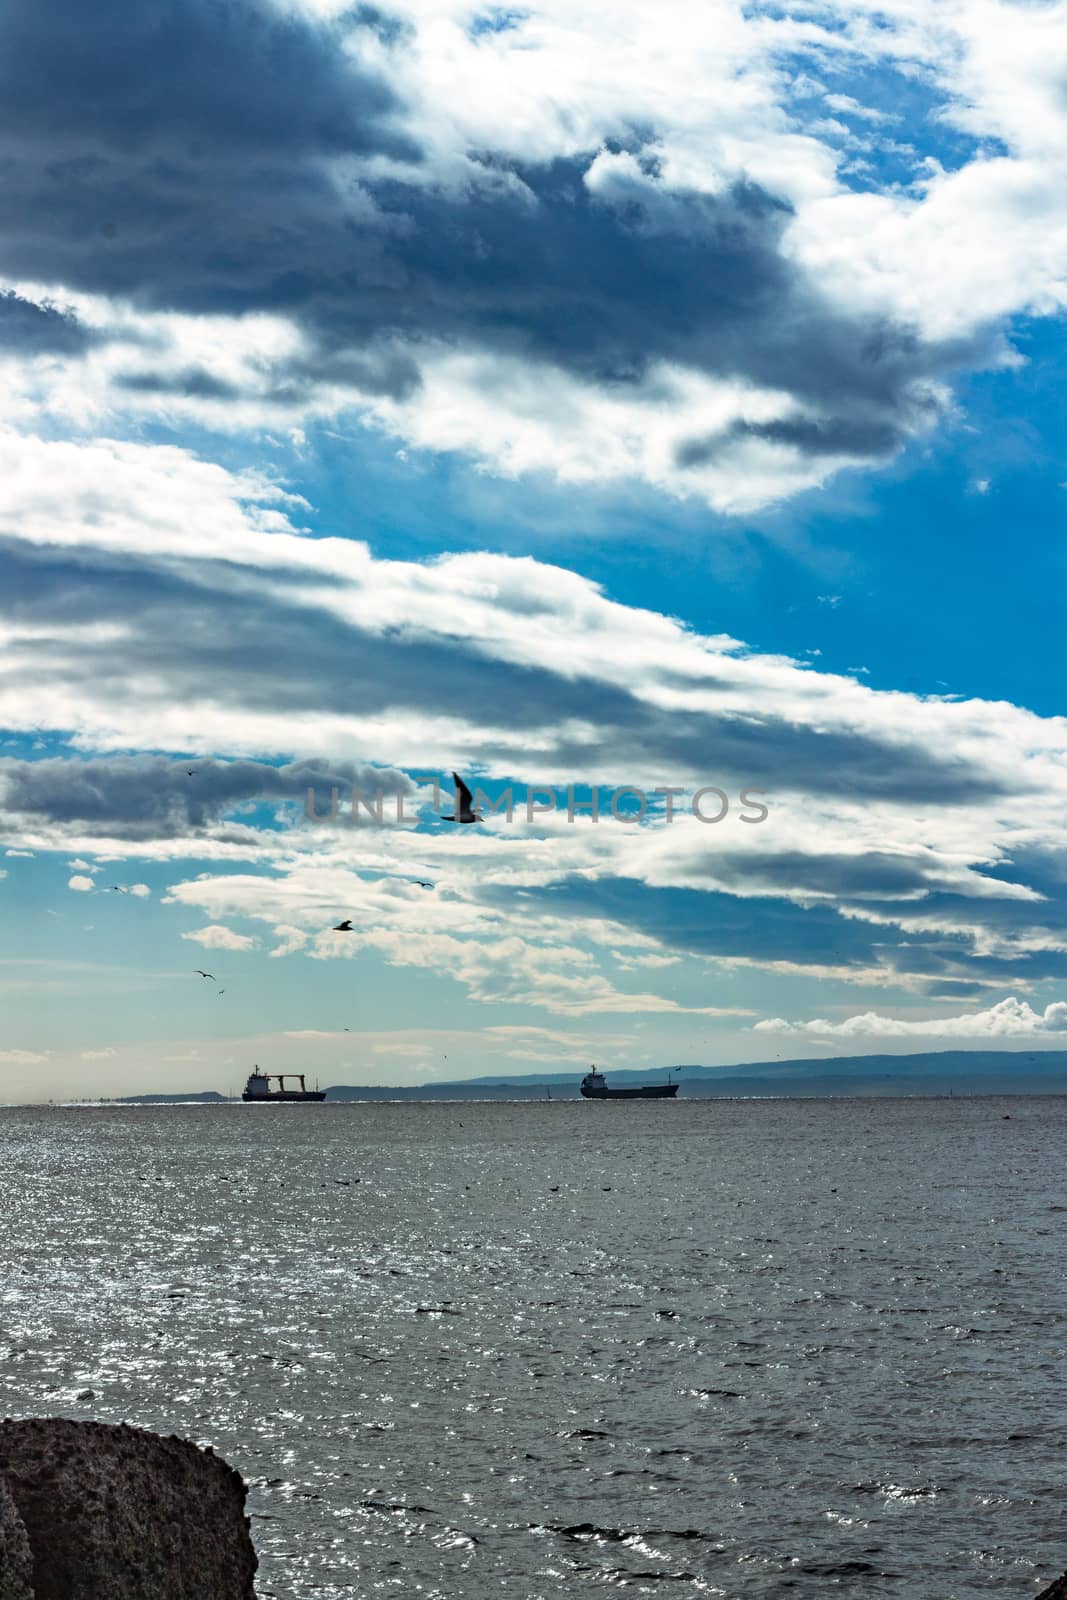 Cargo ships and seagulls by alanstix64